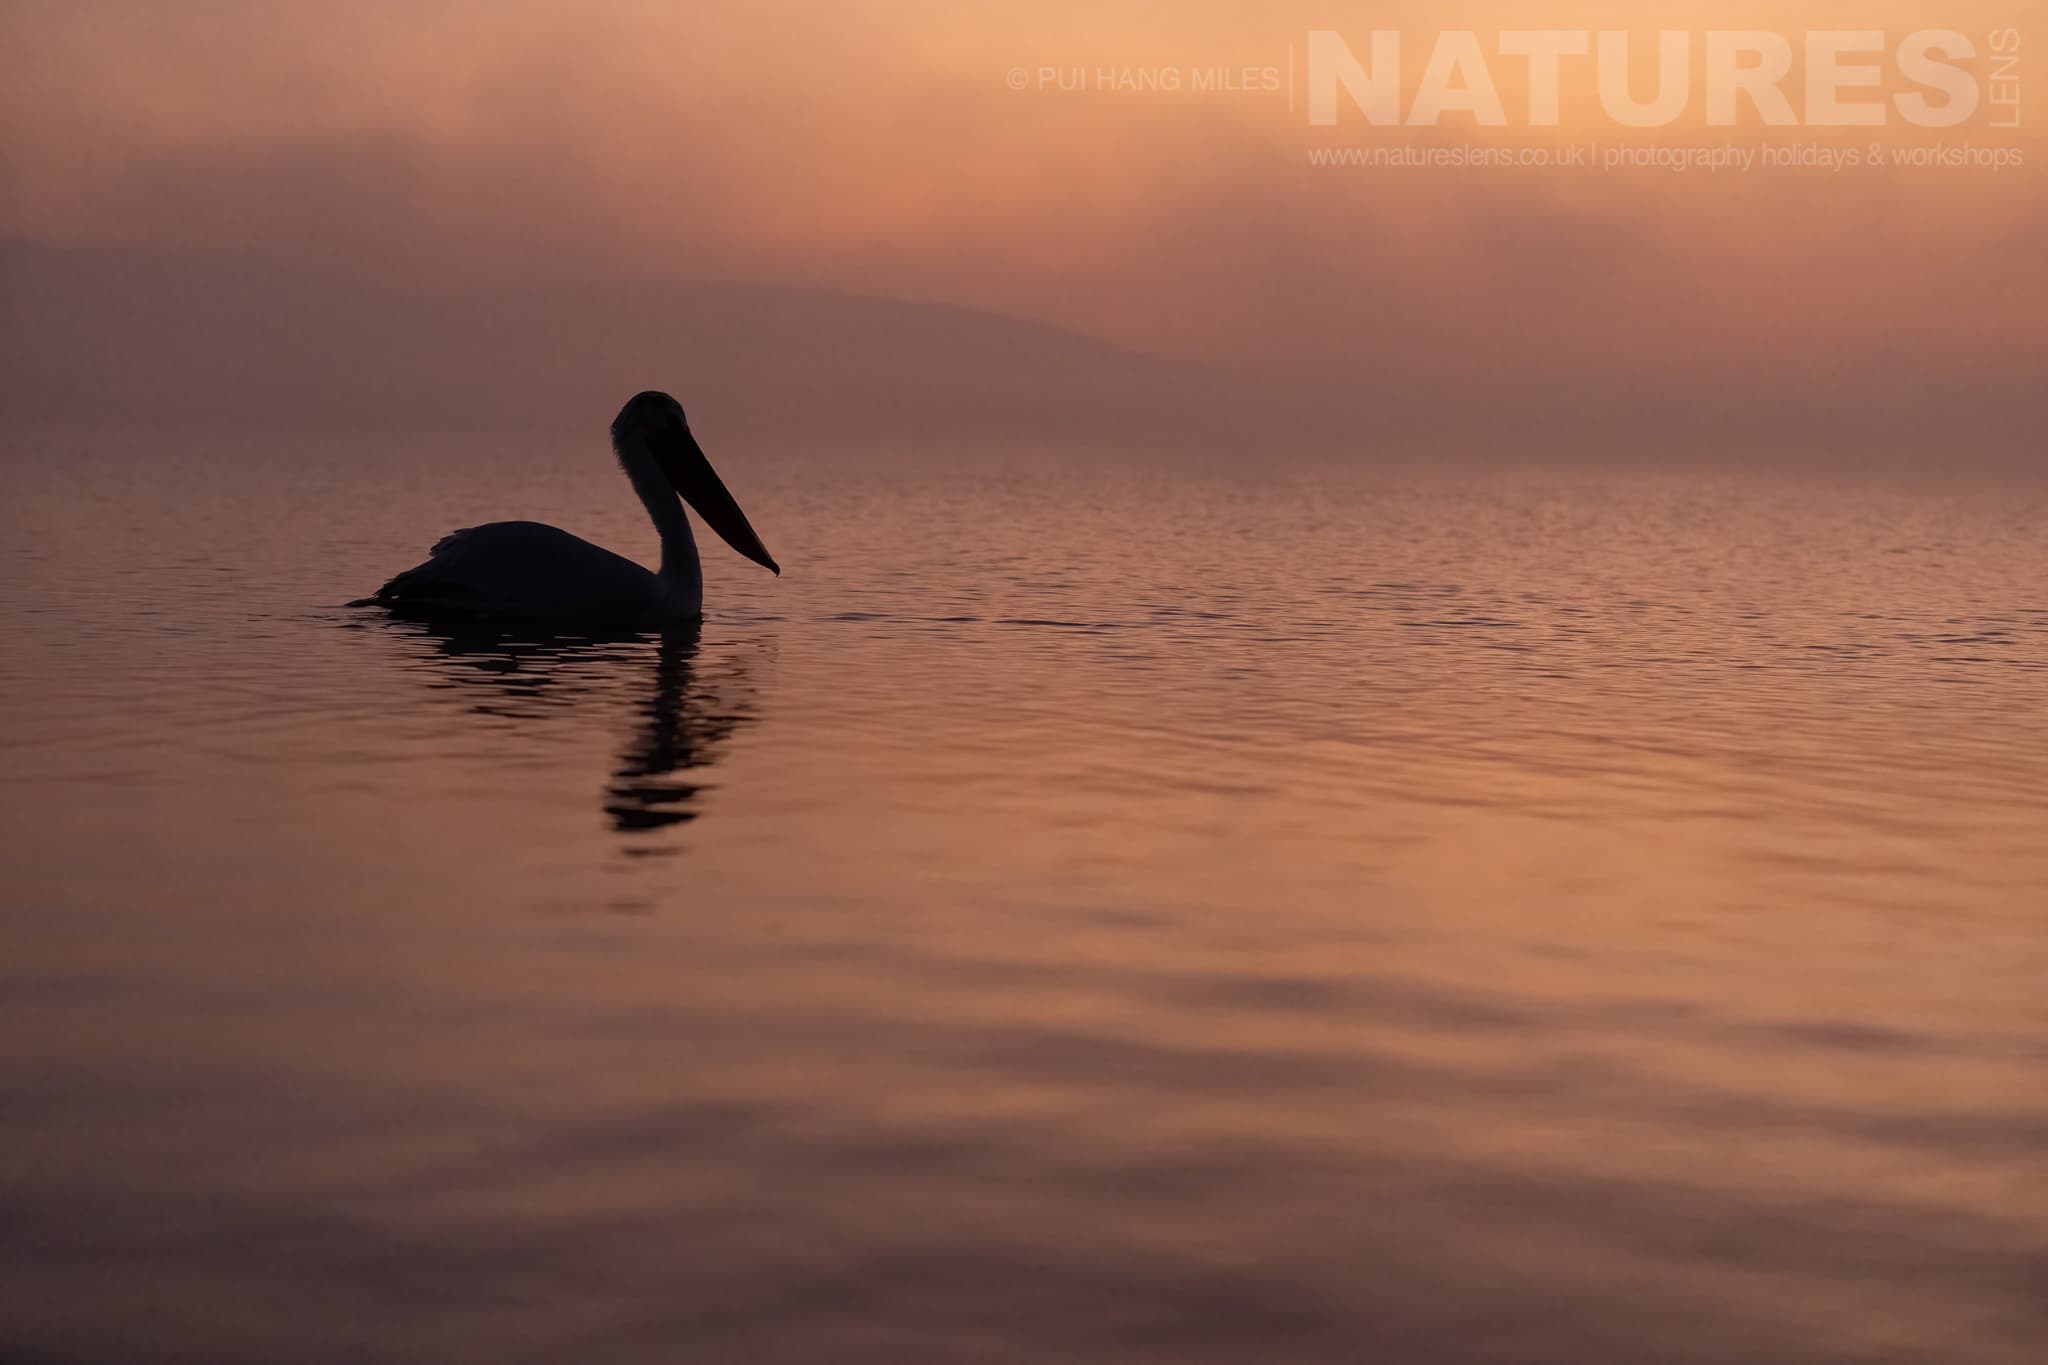 One Of The Pelicans Of Lake Kerkini Drifts At Sunrise Photographed During A Natureslens Pelicans Of Lake Kerkini Photography Holiday